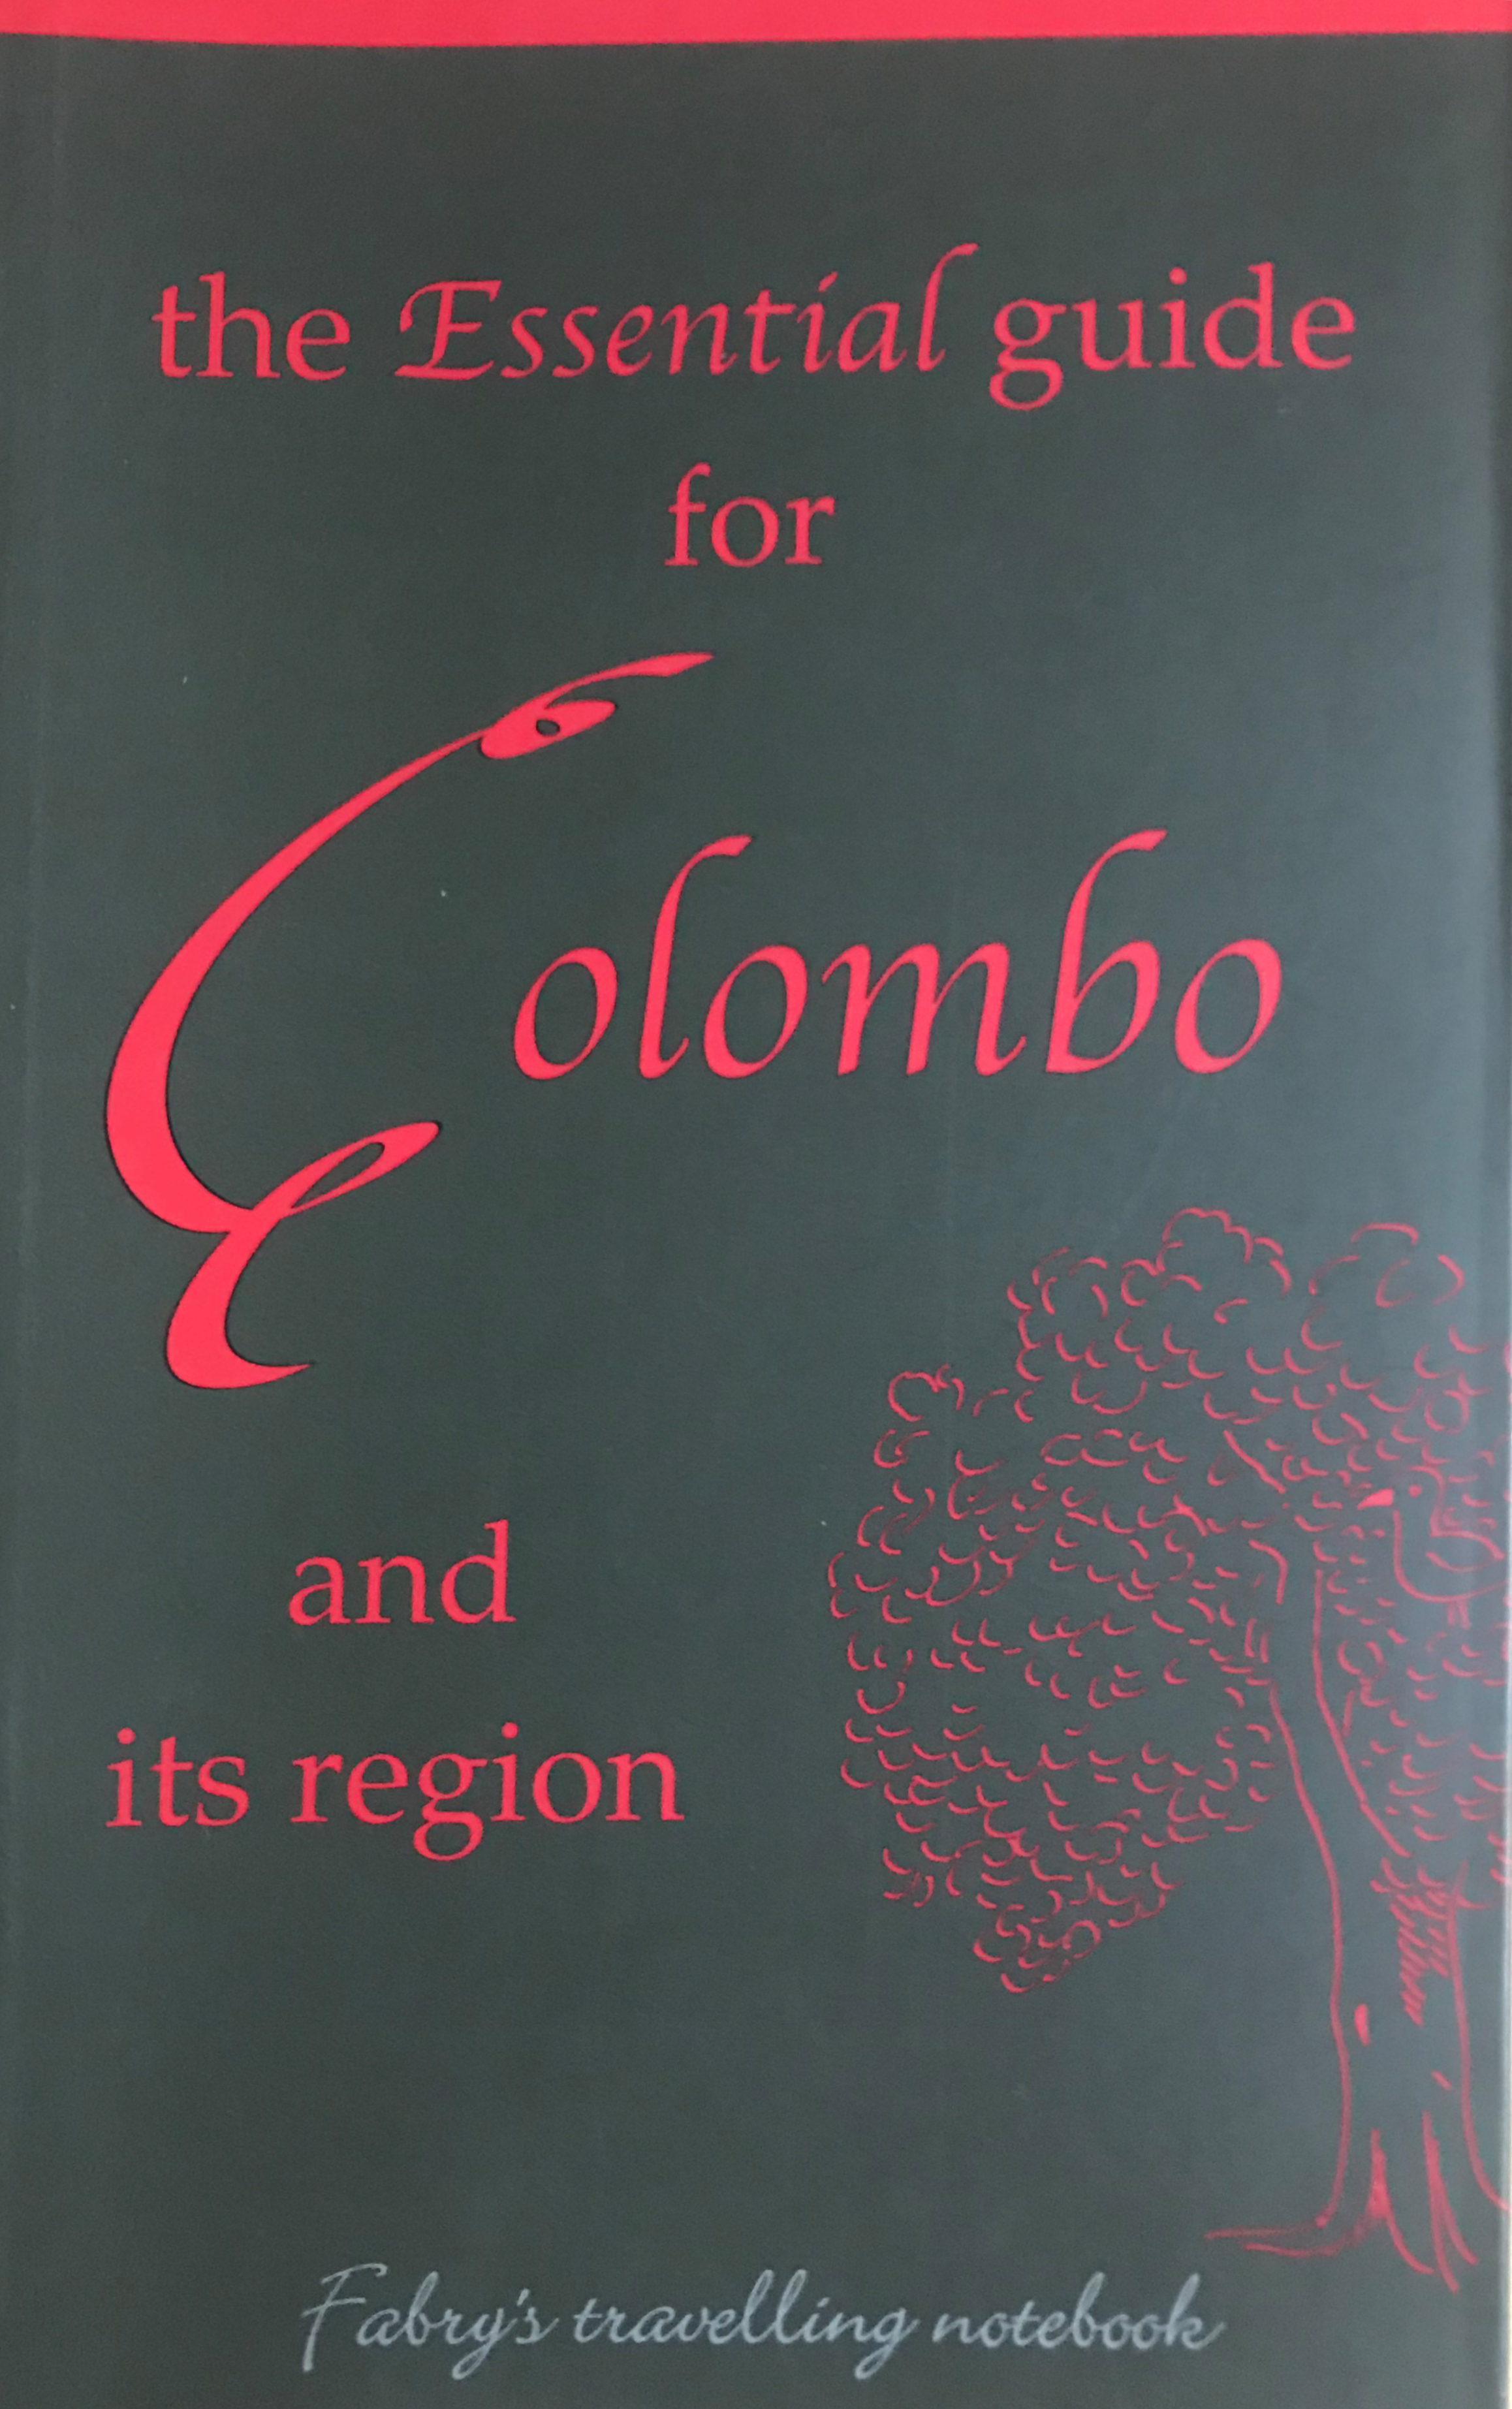 THE ESSENTIAL GUIDE FOR COLOMBO AND ITS REGION -   CAROLINE MACDONALD - 9789558736098